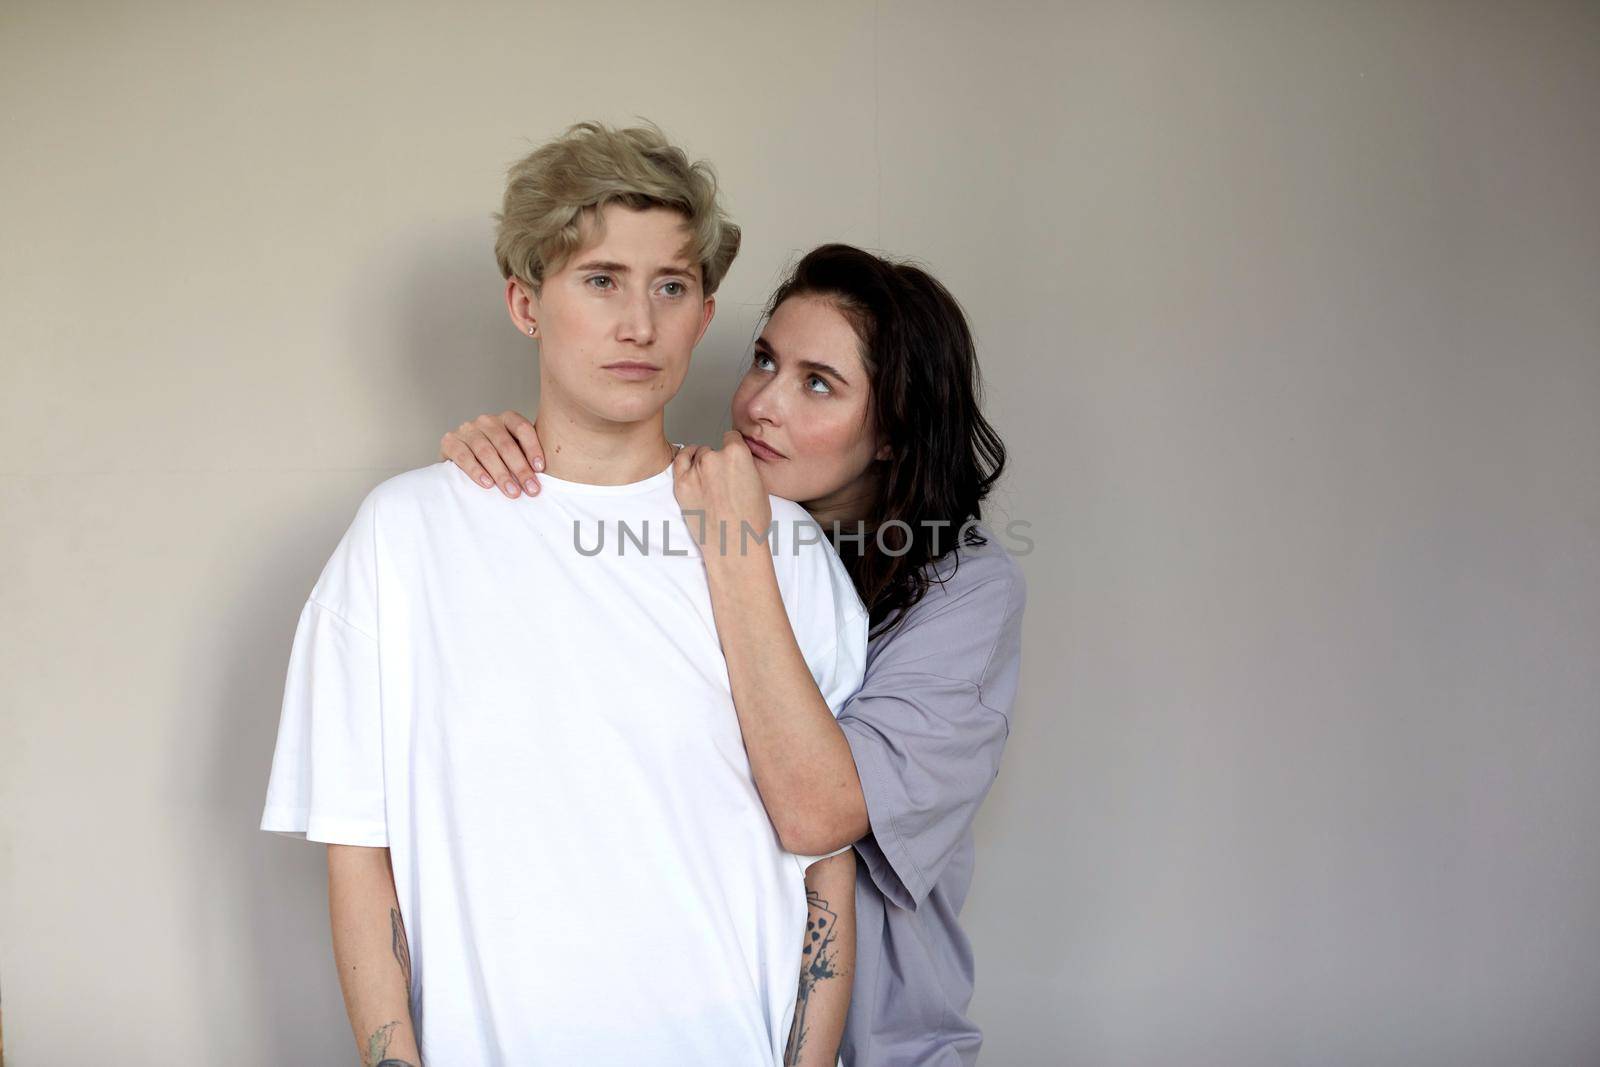 Young brunette embracing and looking at androgynous woman with short hair against gray wall